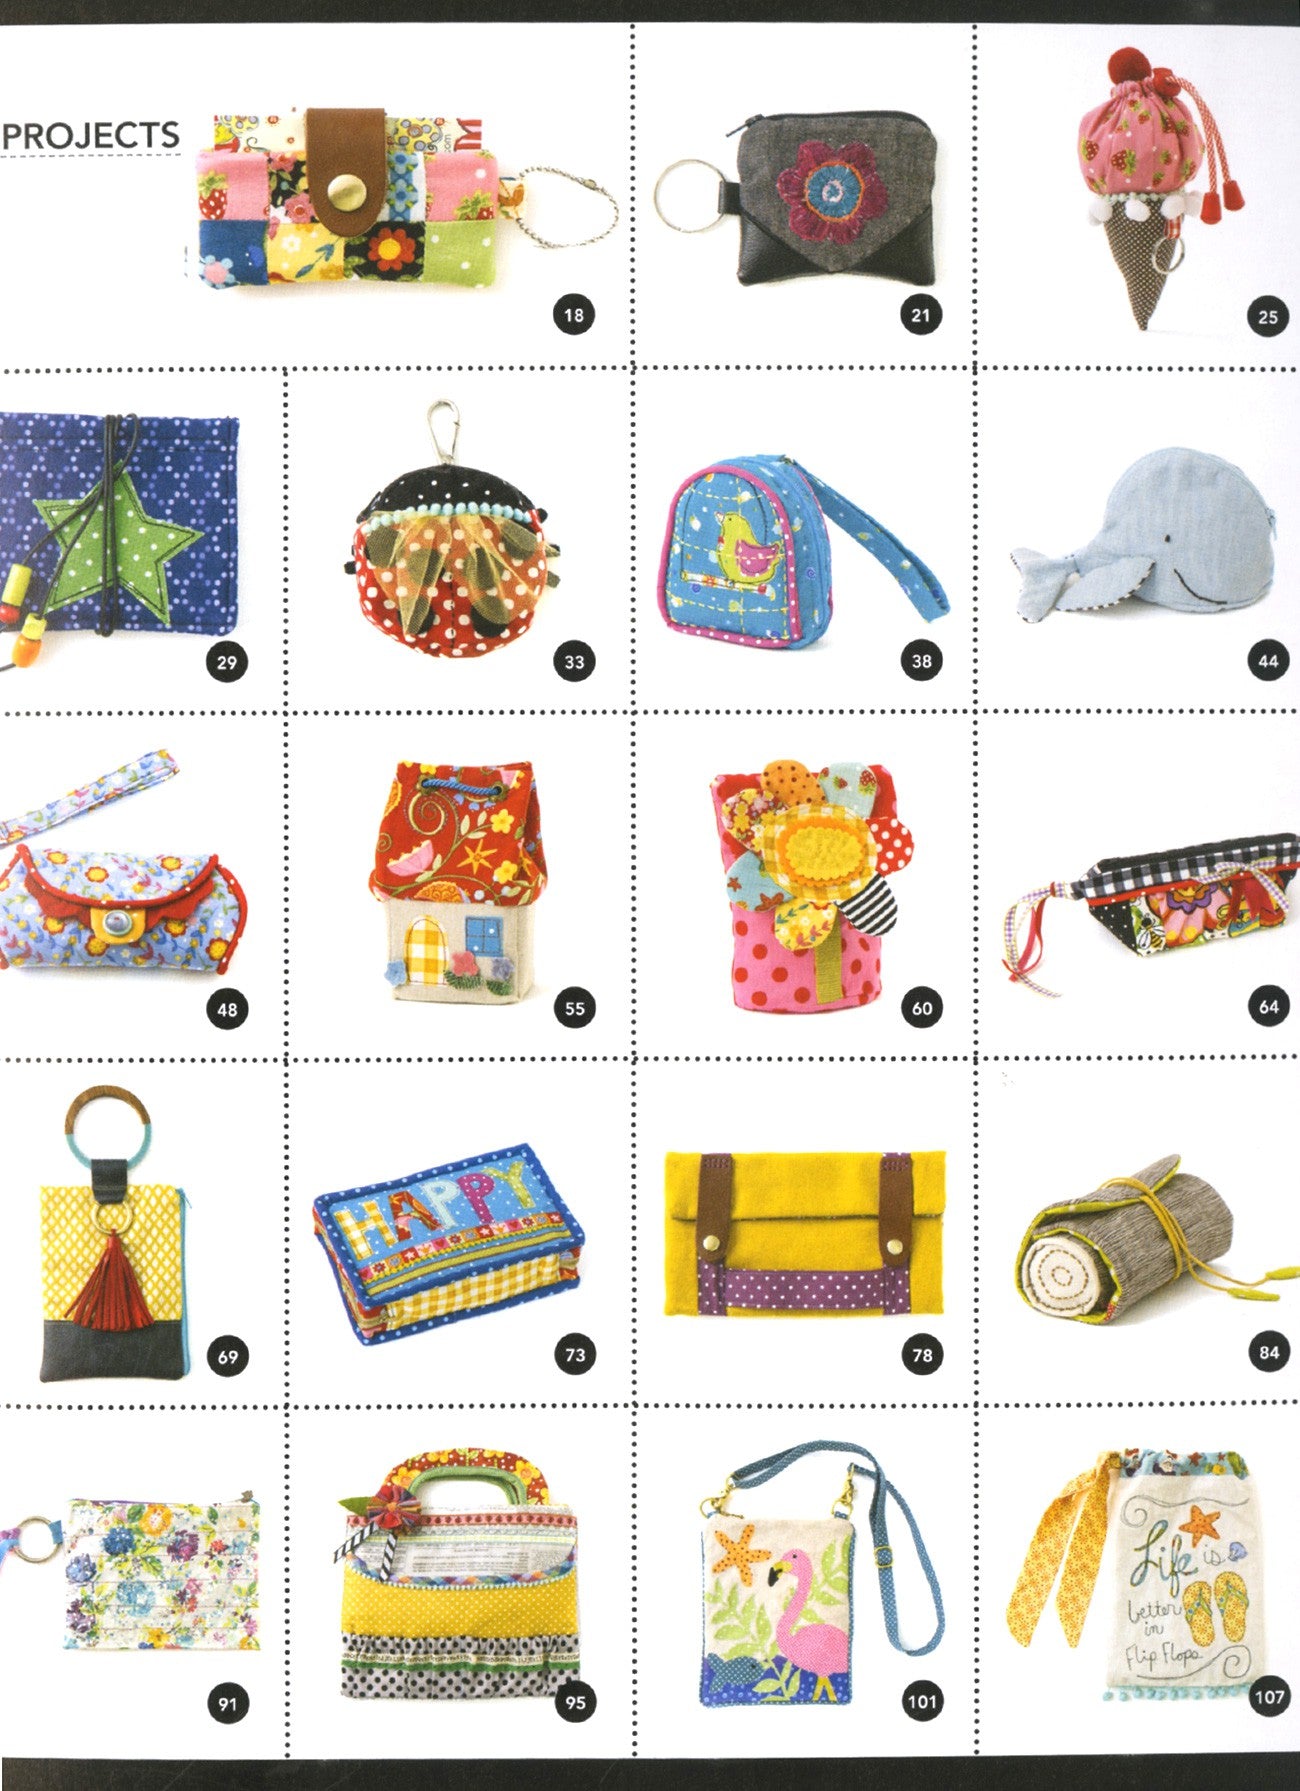 Sew Small—19 Little Bags: Stash Your Coins, Keys, Earbuds, Jewelry & More [eBook]